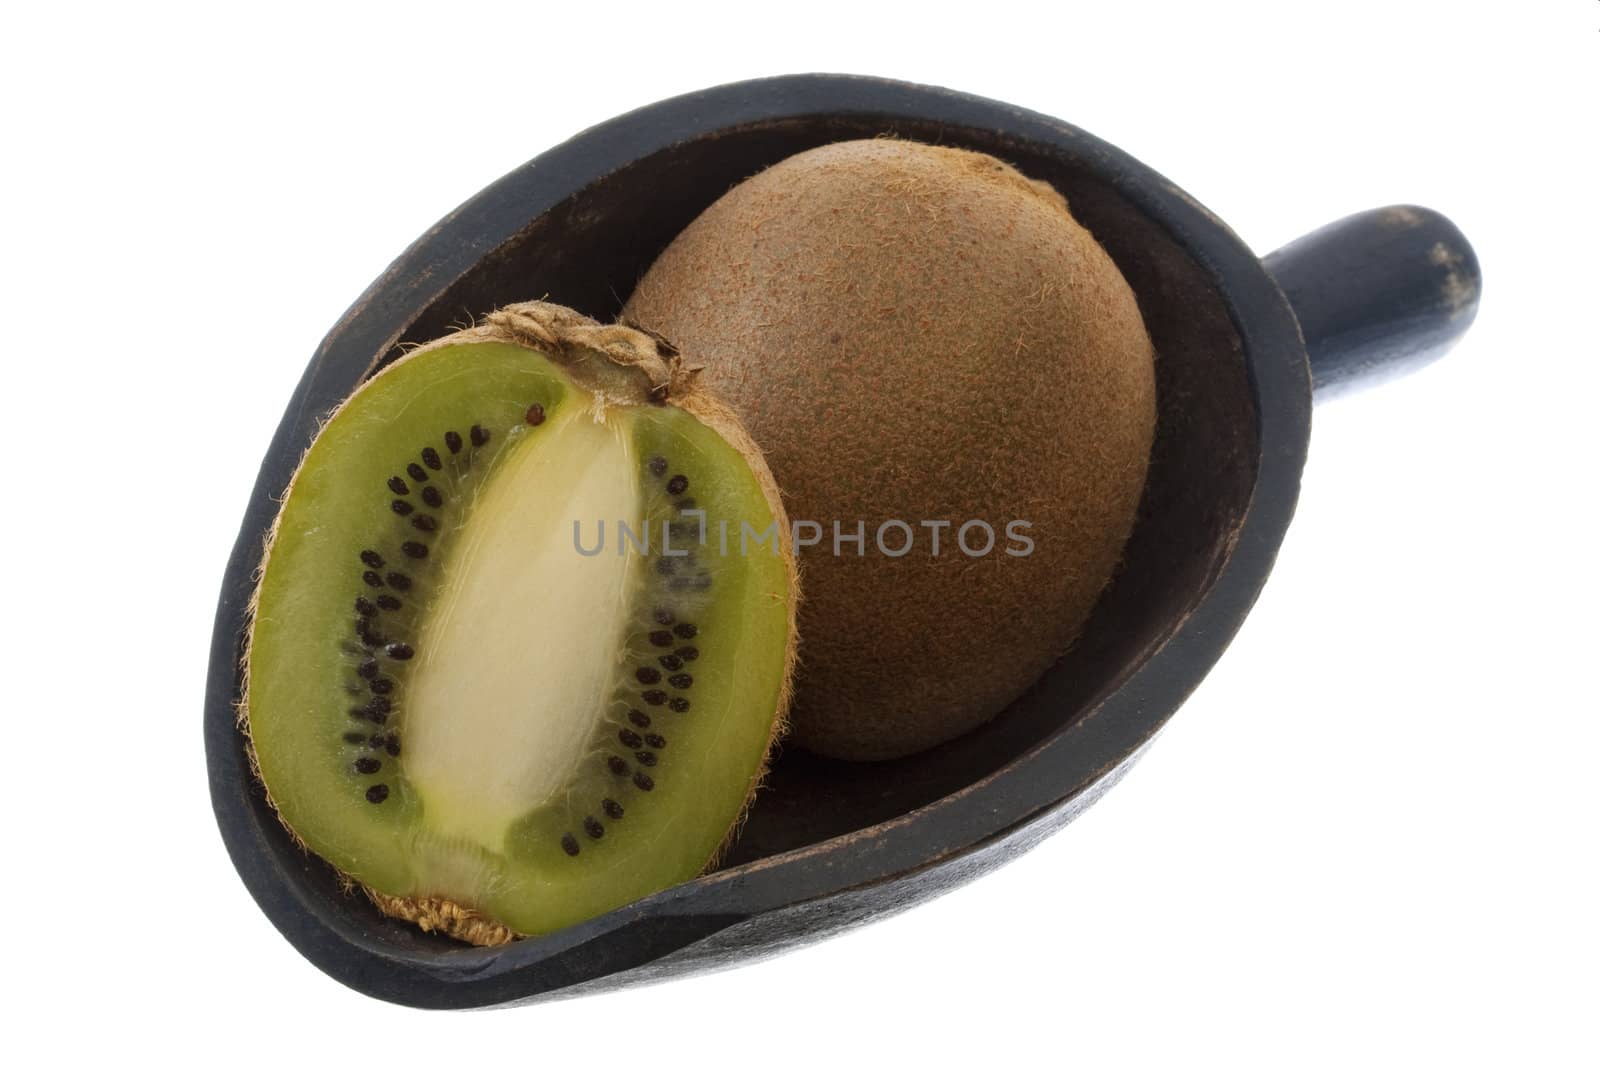 whole and cross section of kiwi fruit on a rustic, wooden scoop, isolated on white